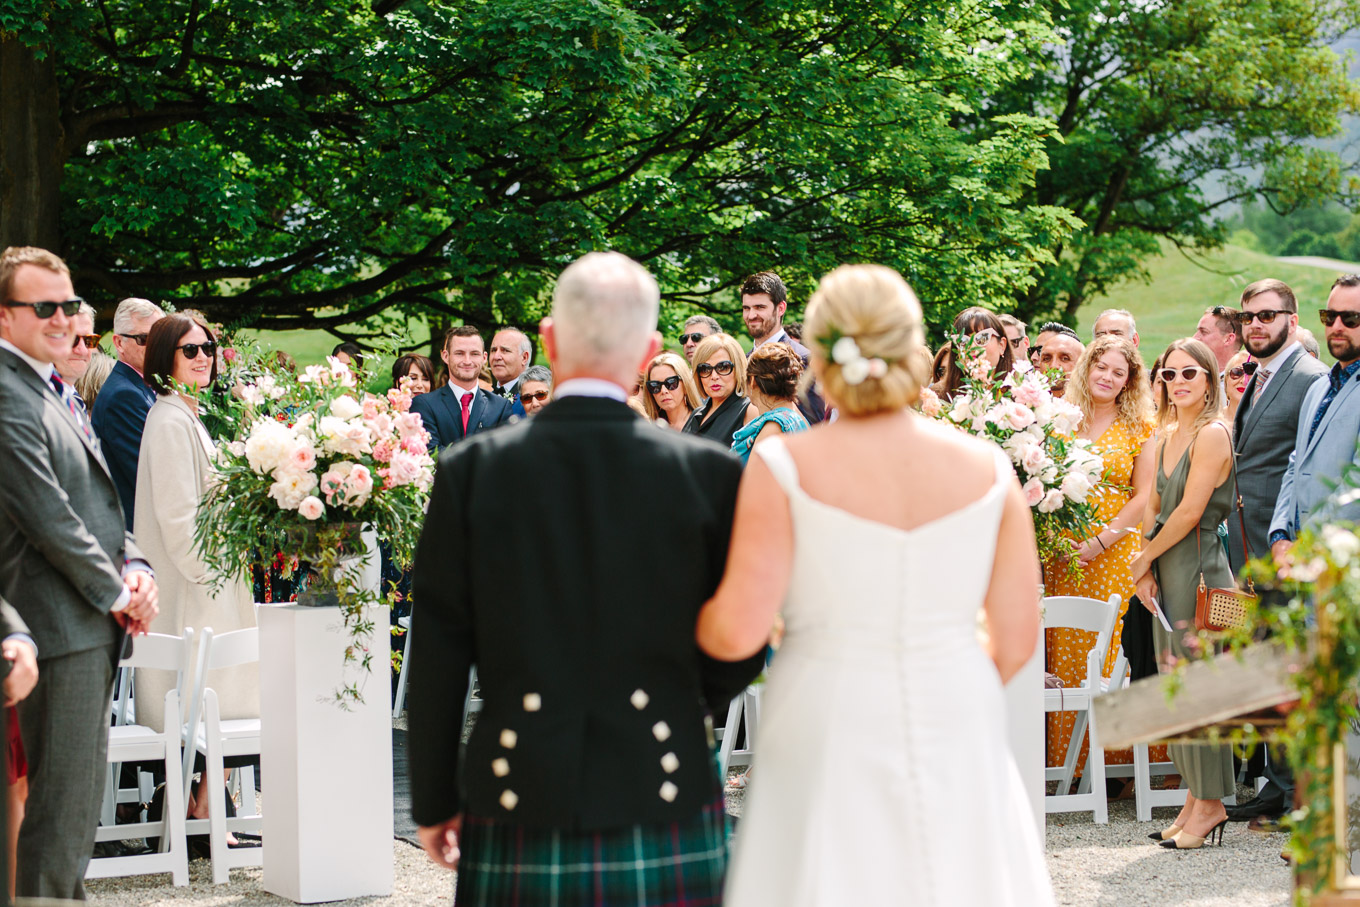 Bride and father in traditional Scottish kilt walking down the aisle at wedding ceremony. 